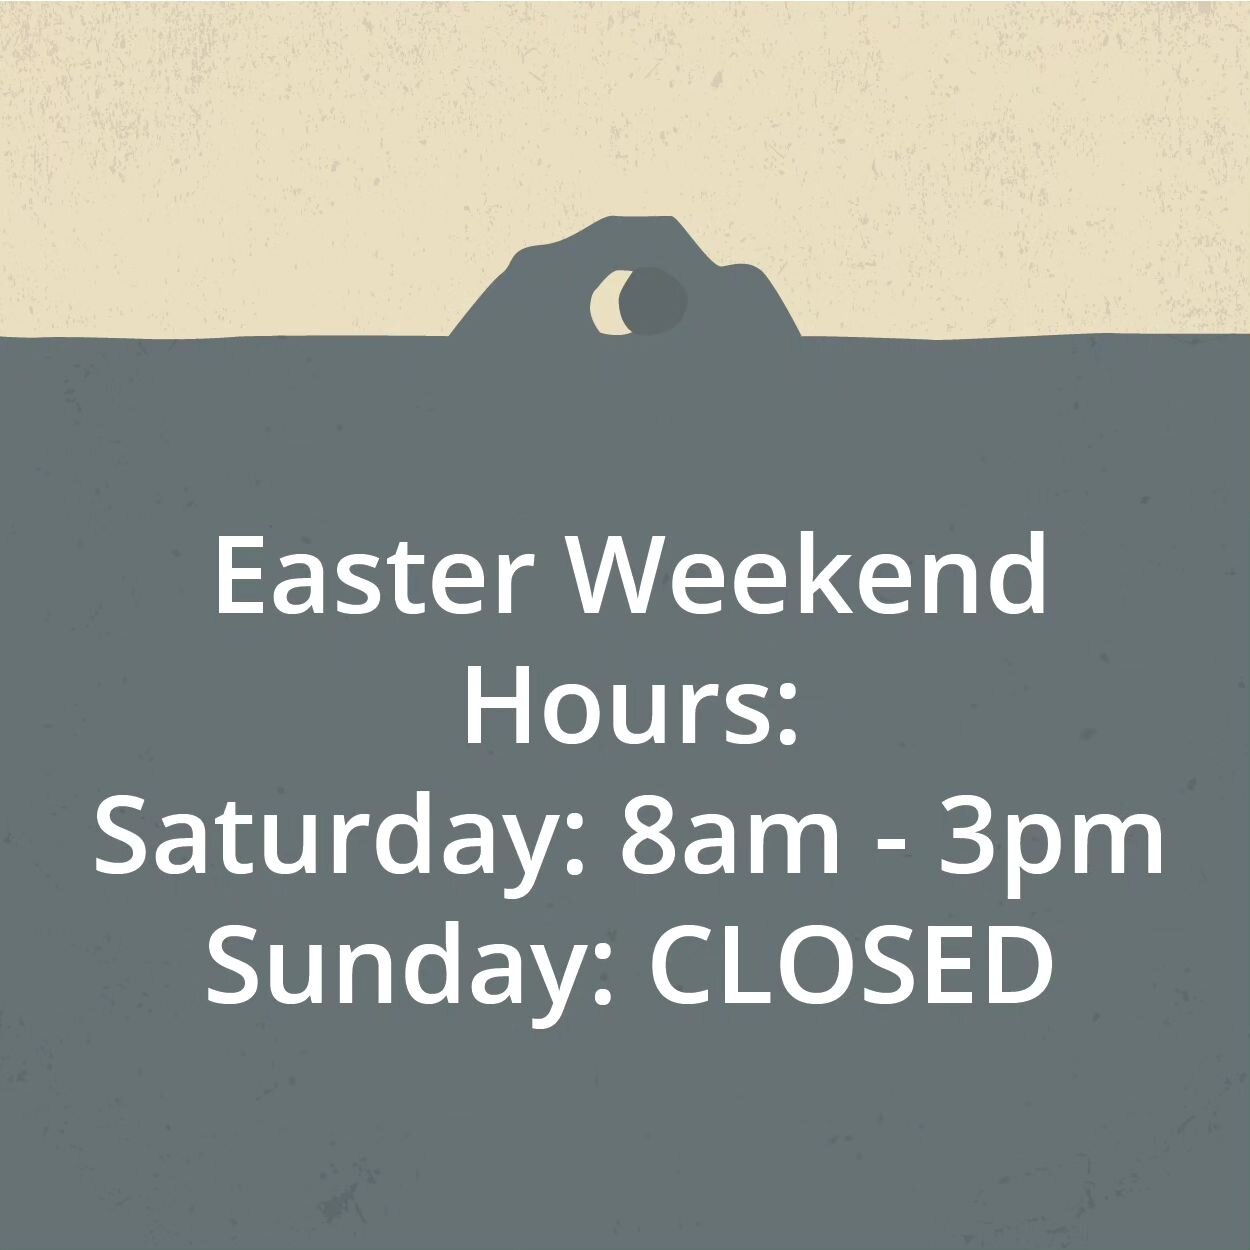 REMINDER: Will be closed on Easter Sunday. Normal hours Saturday. Thank you all for understanding ❤️